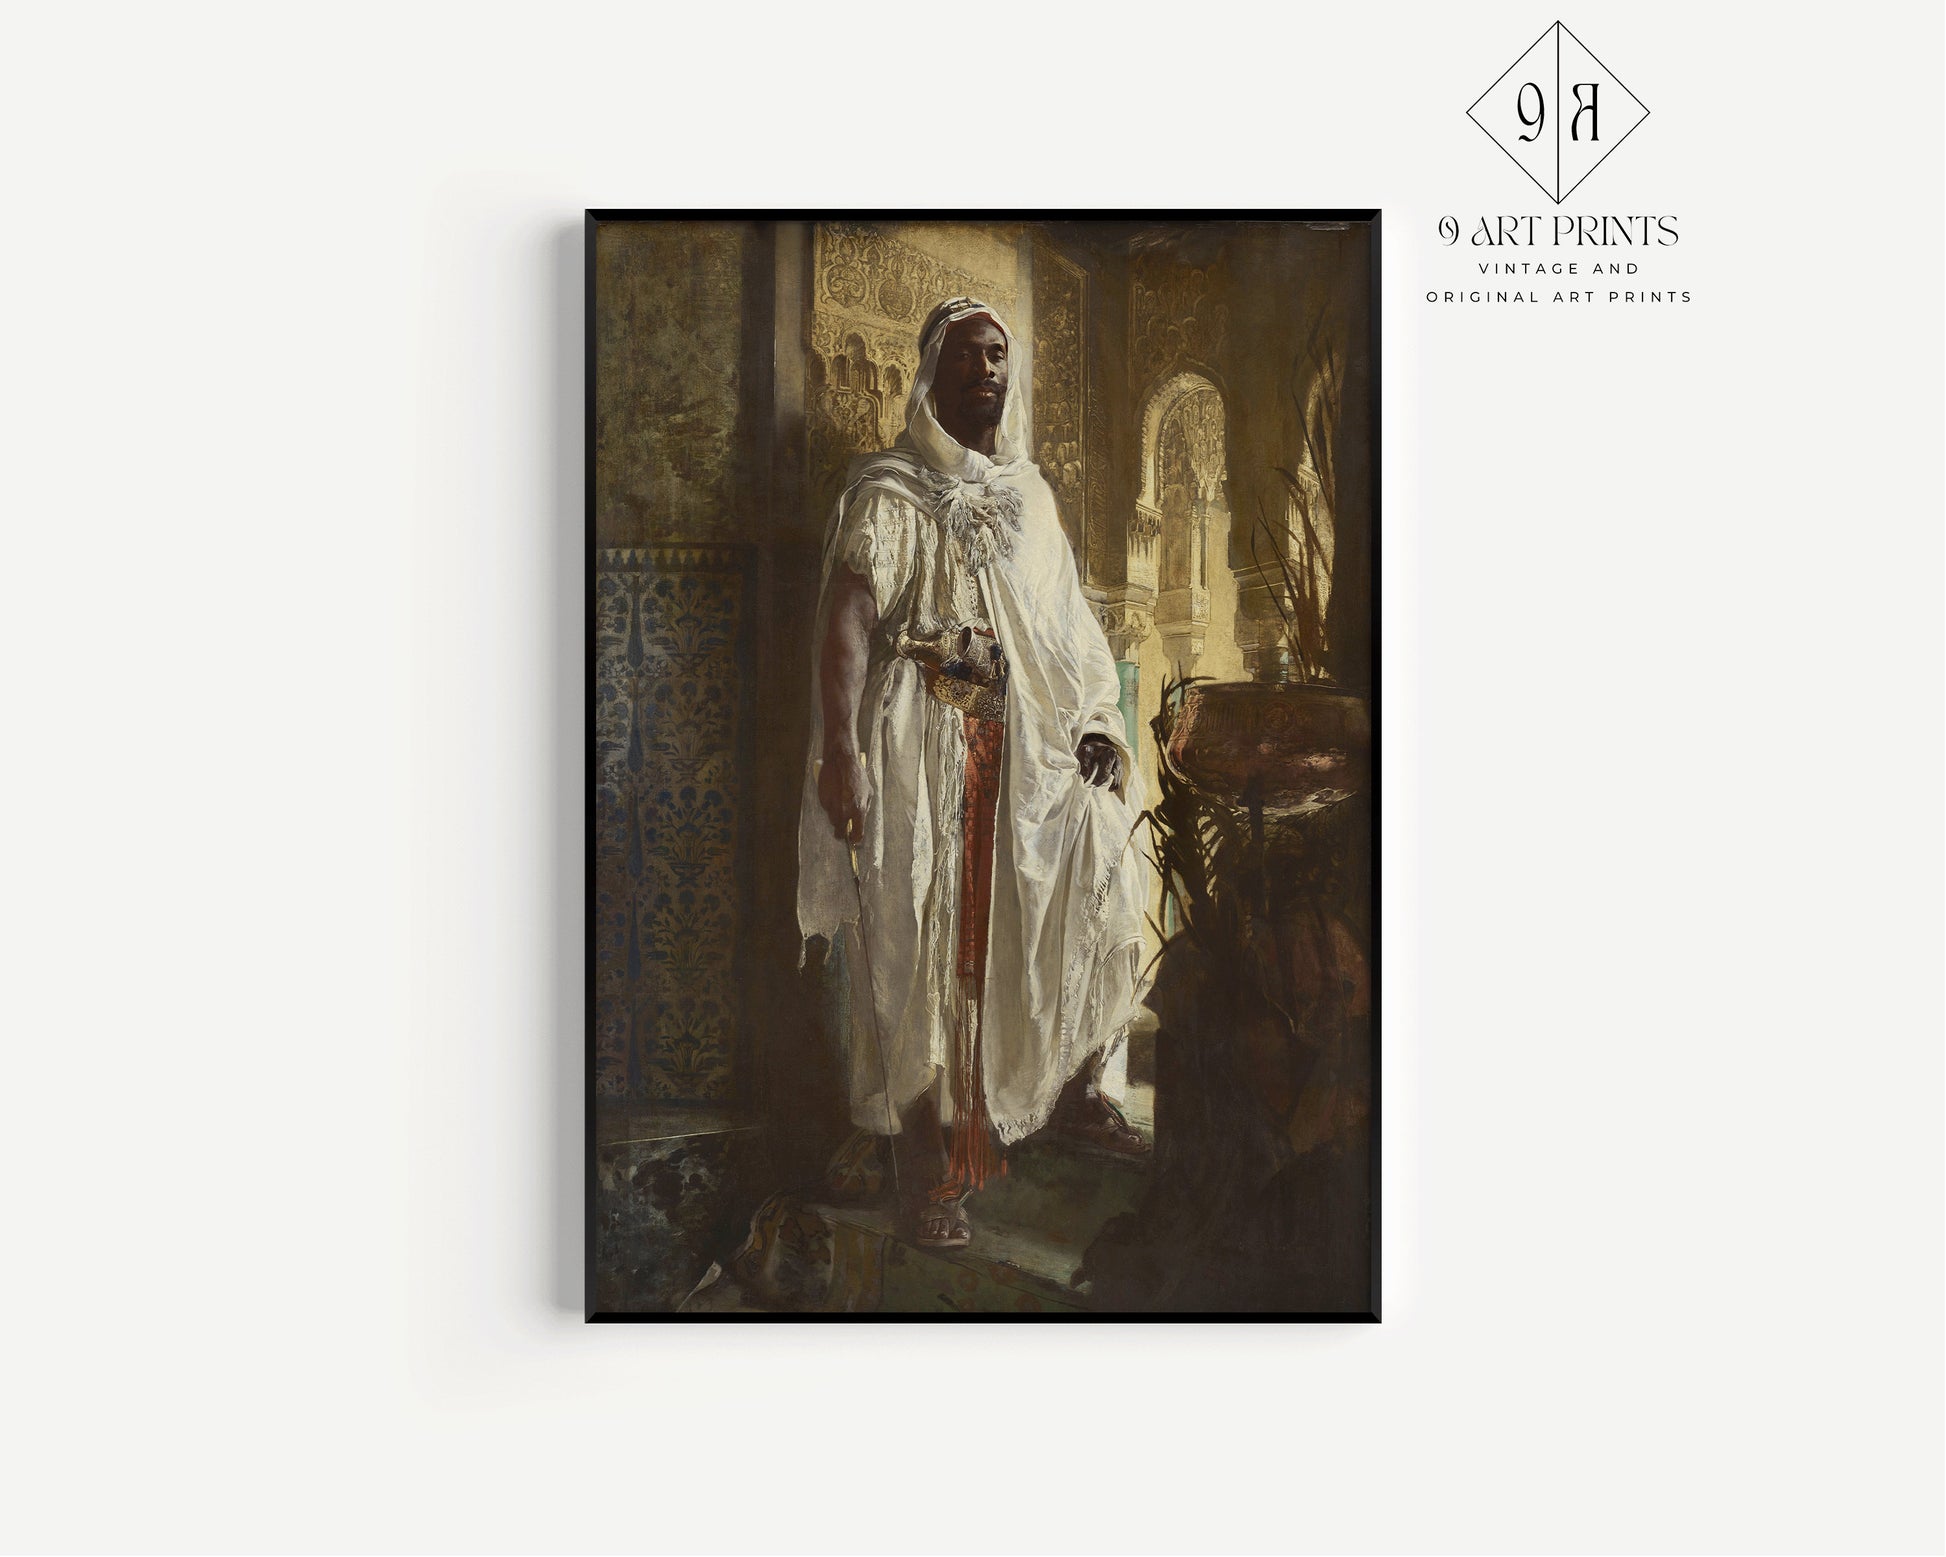 Eduard Charlemont The Moorish Chief Fine Art Famous Iconic Painting Vintage Ready to hang Framed Home Office Decor Print Gift Idea